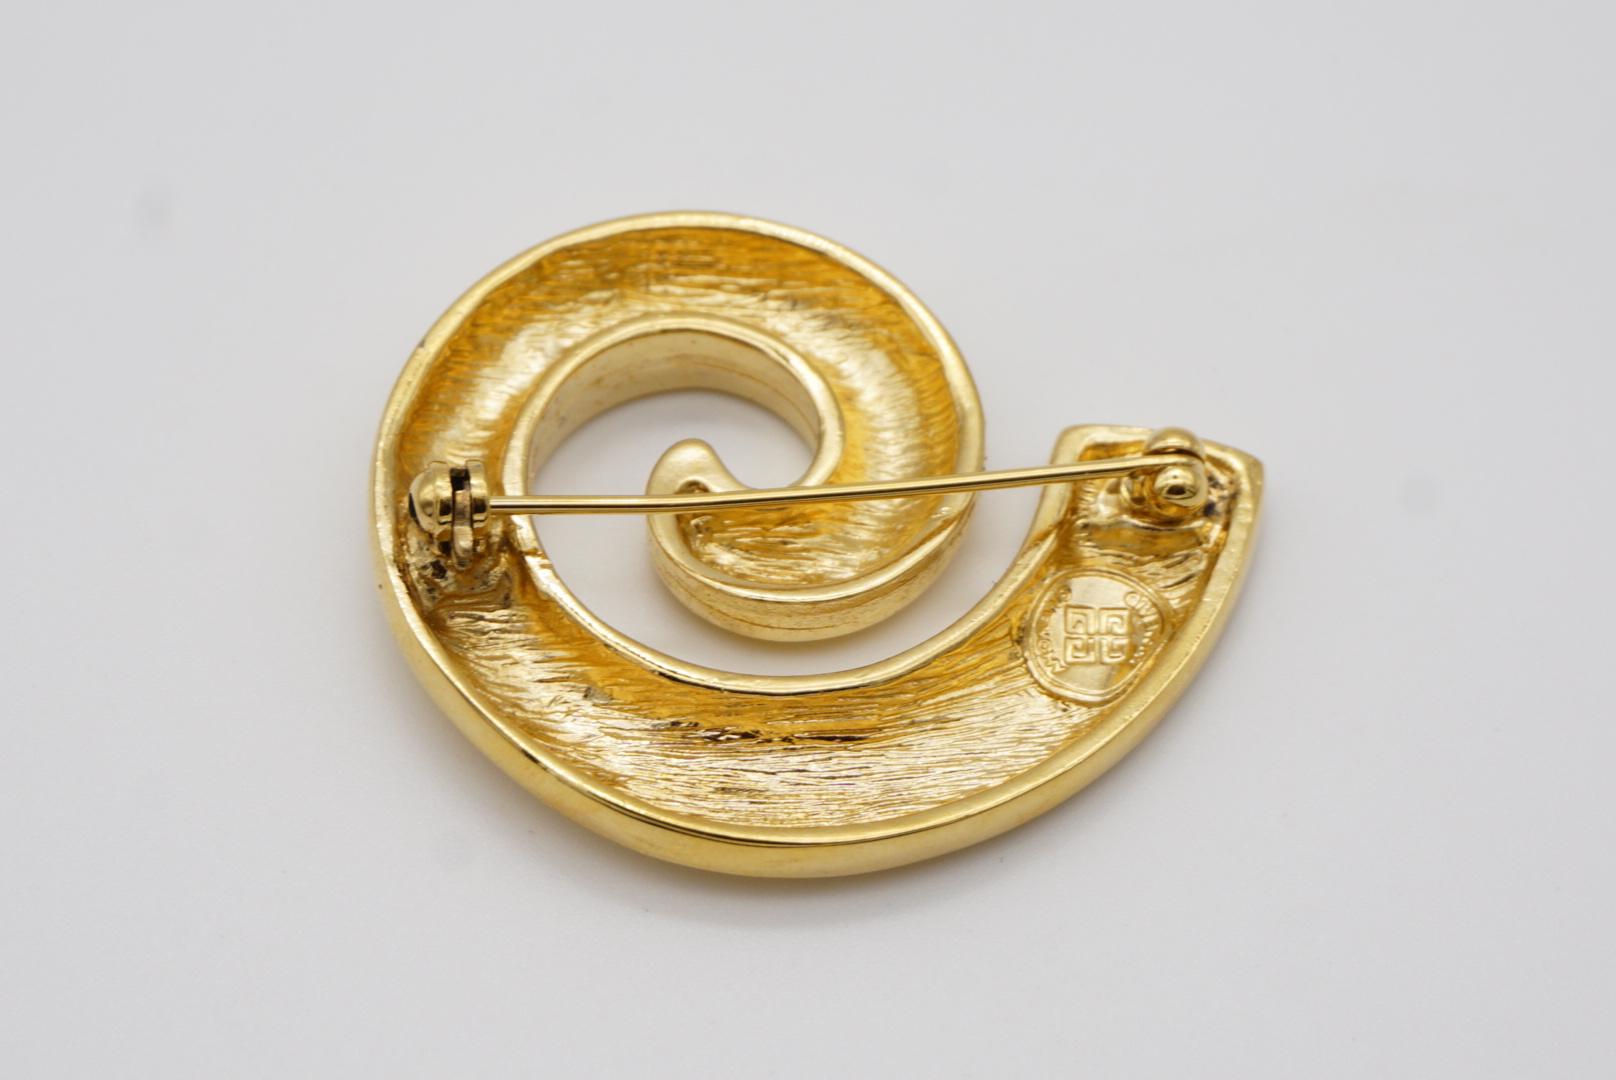 Givenchy Vintage 1980s Large Glow Swirl Sculpted Abstract Modernist Gold Brooch For Sale 4